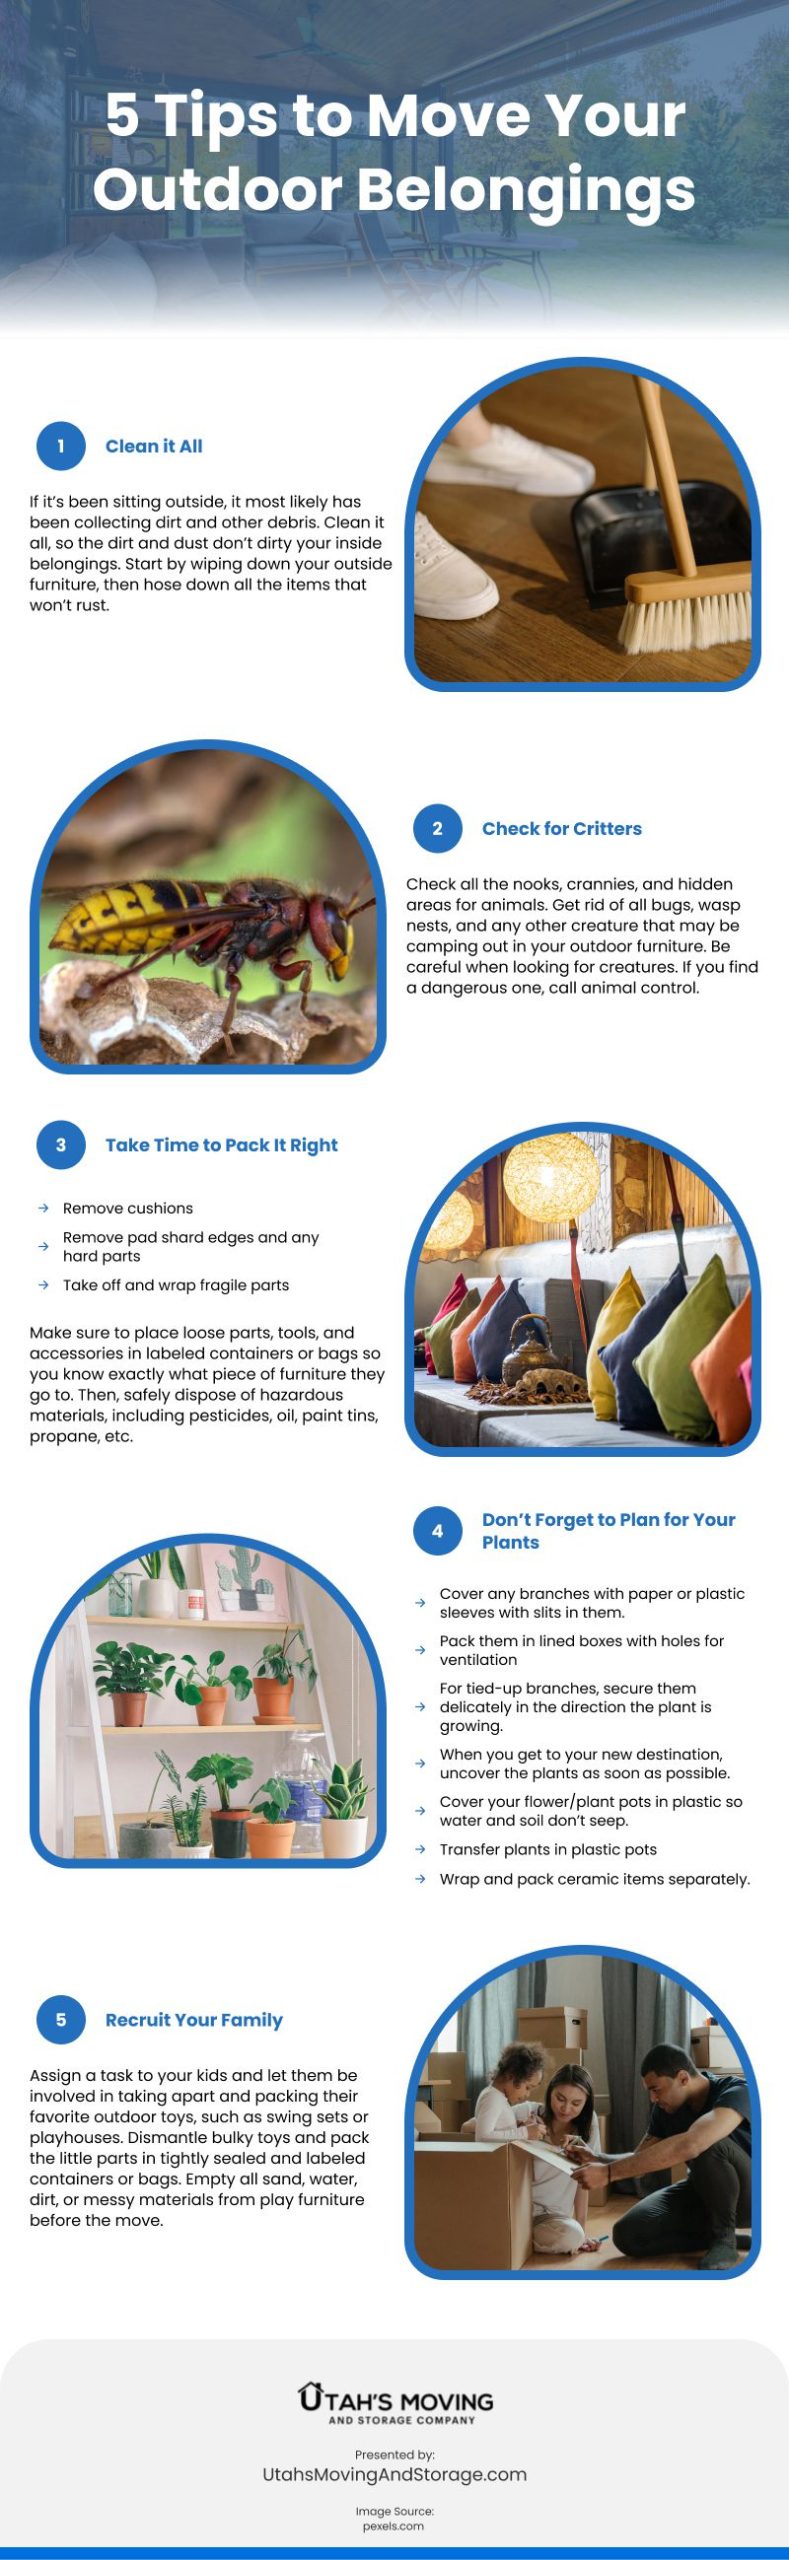 5 Tips to Move Your Outdoor Belongings Infographic